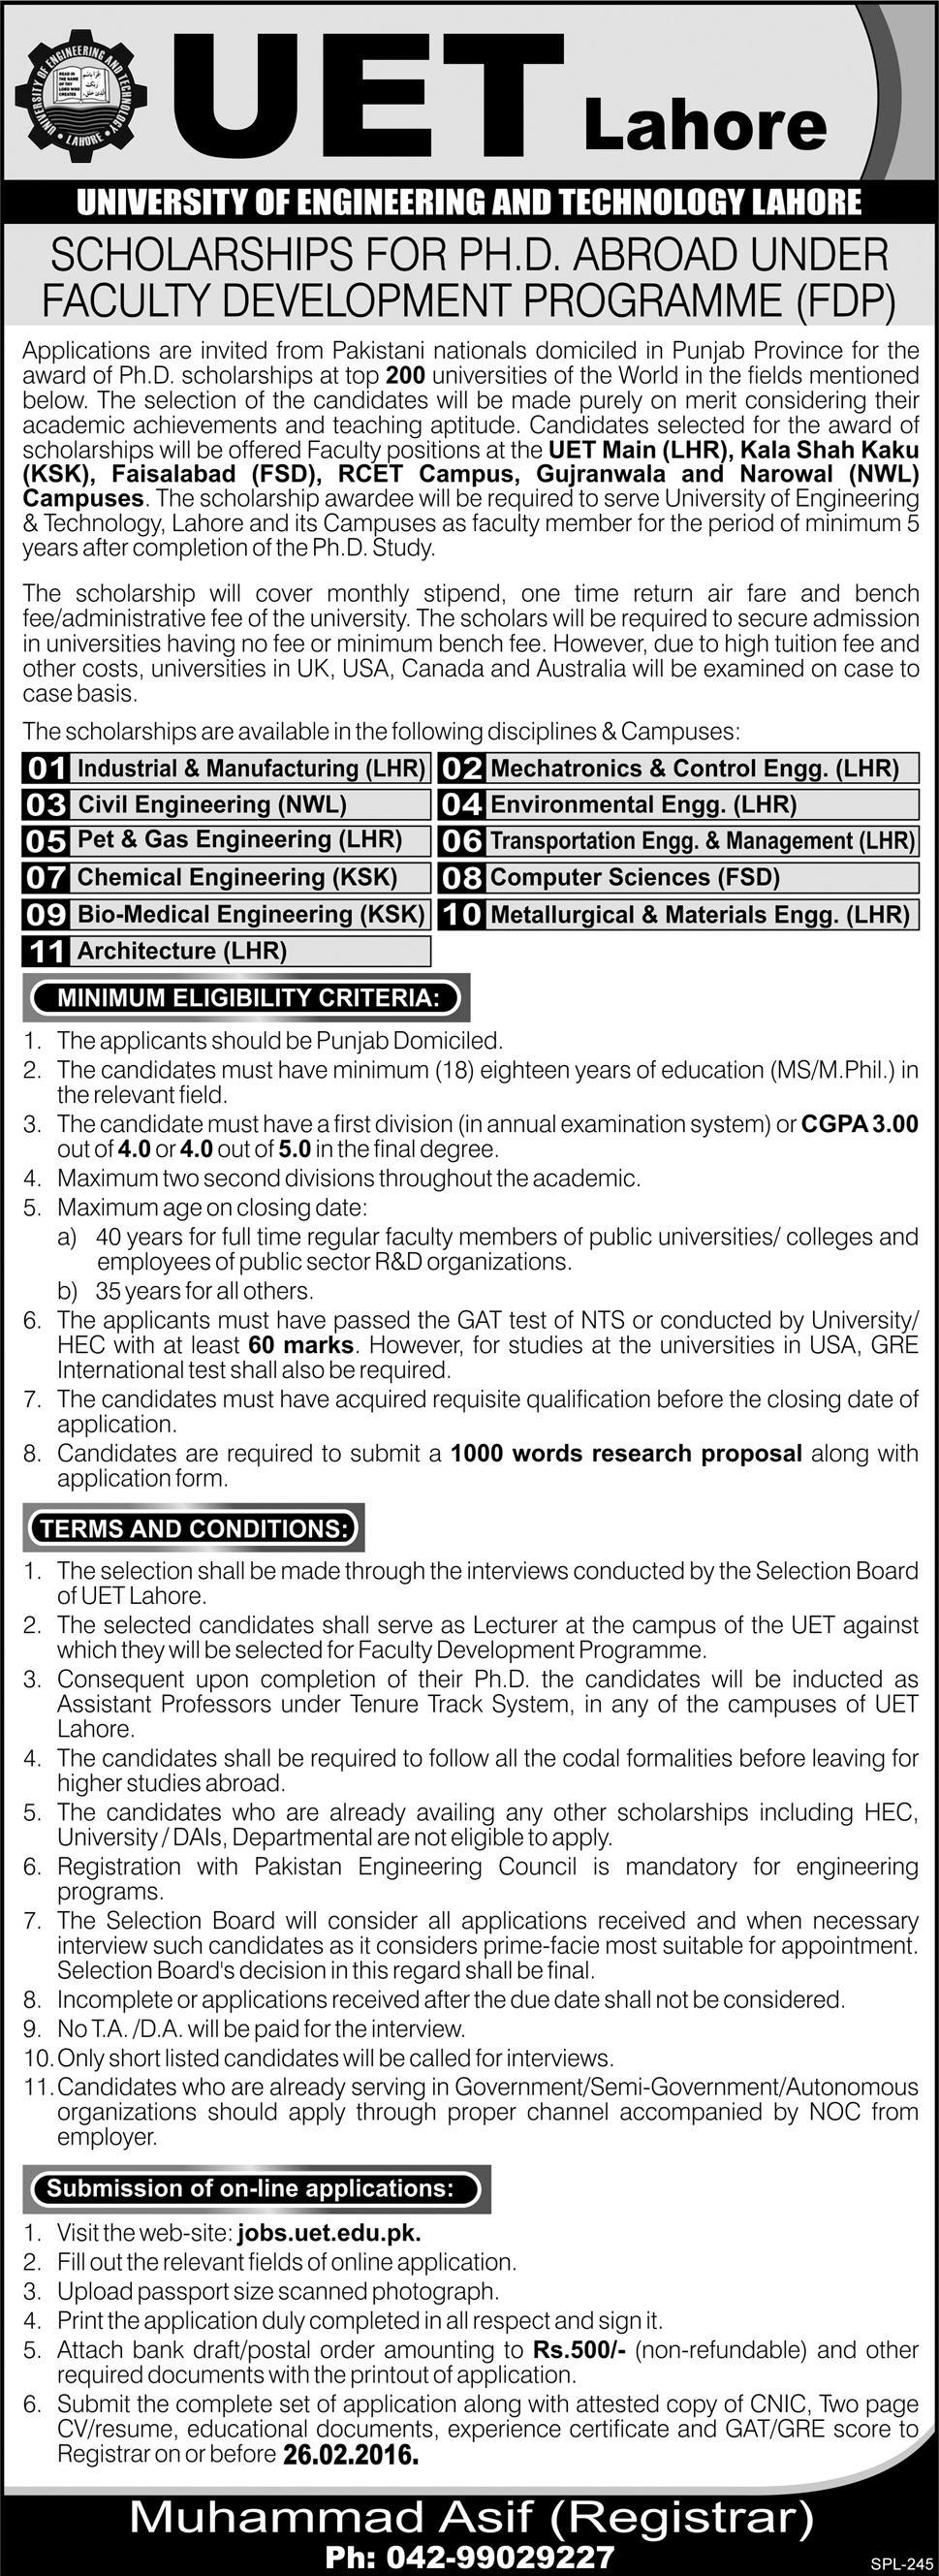 UET Lahore Scholarships For PH.D Abroad Under Faculty Development Program 2017